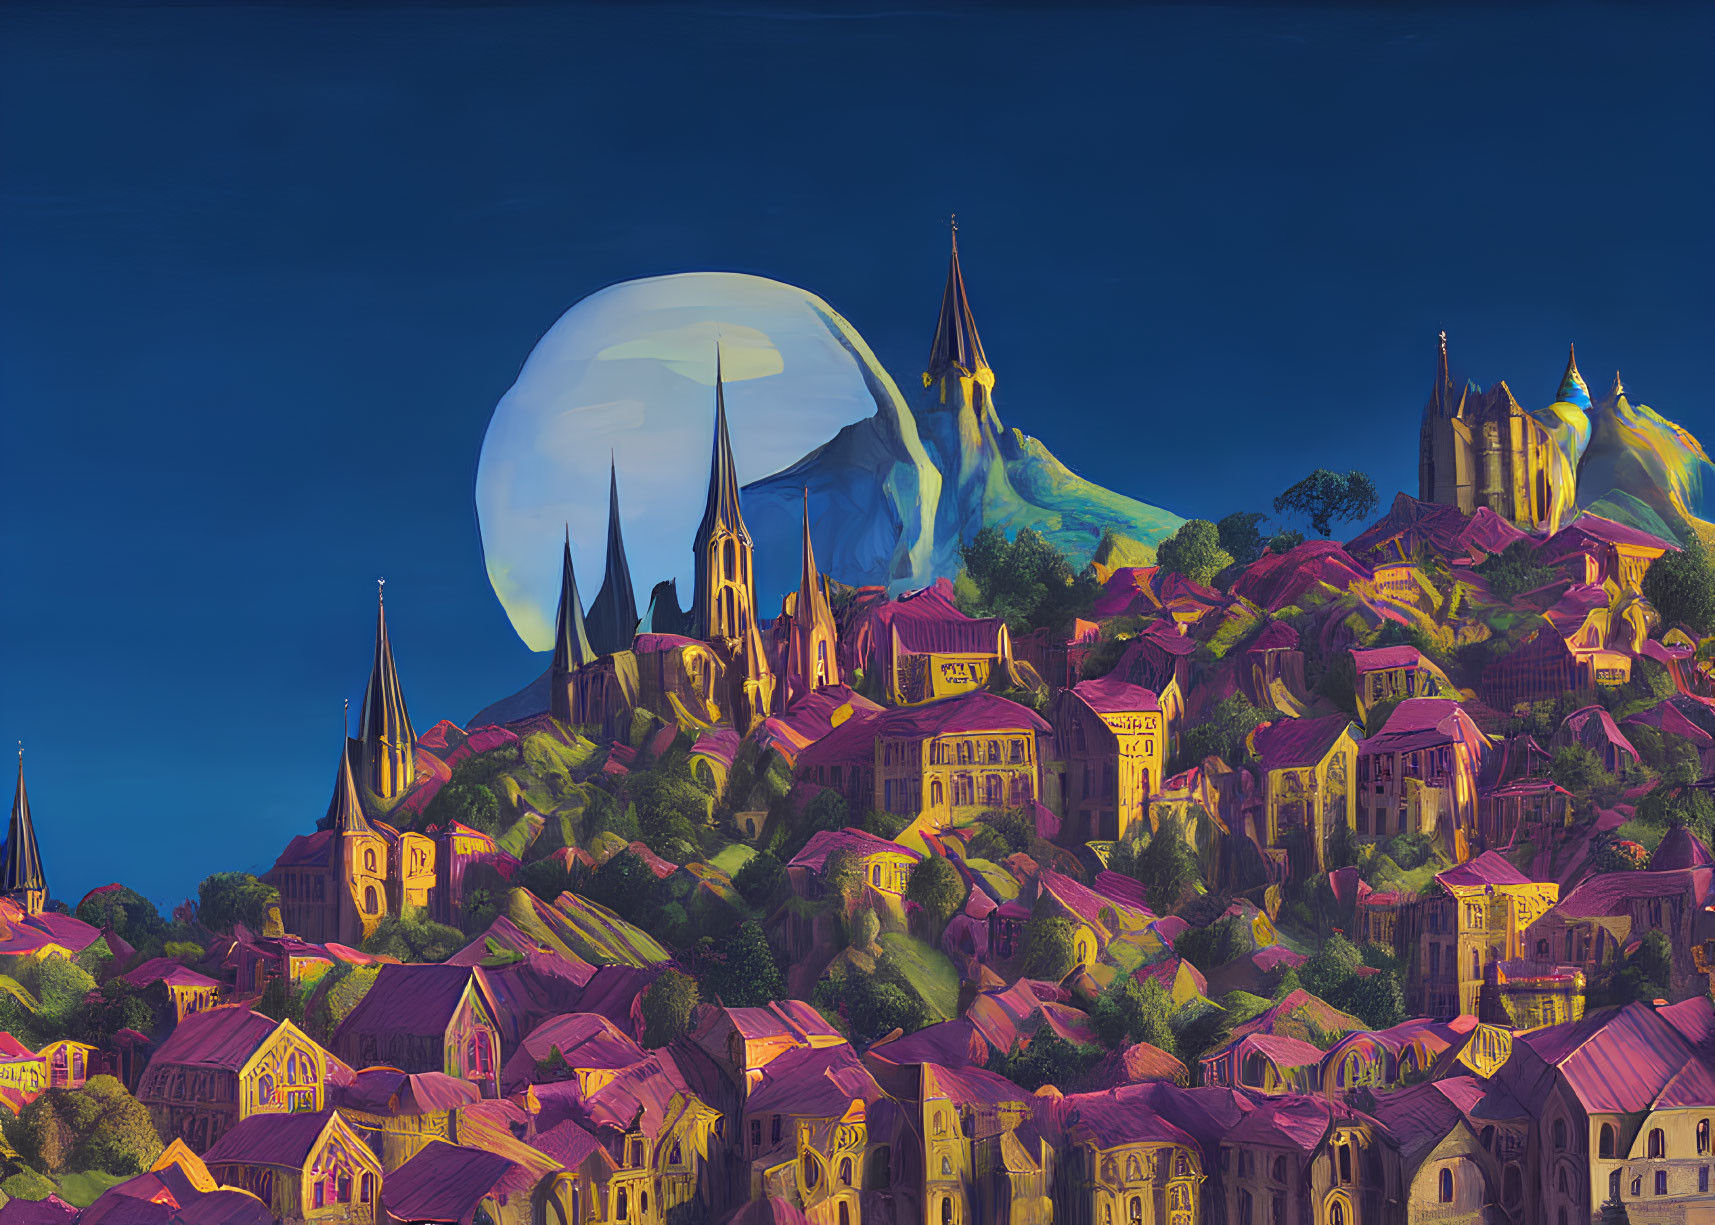 Colorful moonlit village painting with steeples under night sky